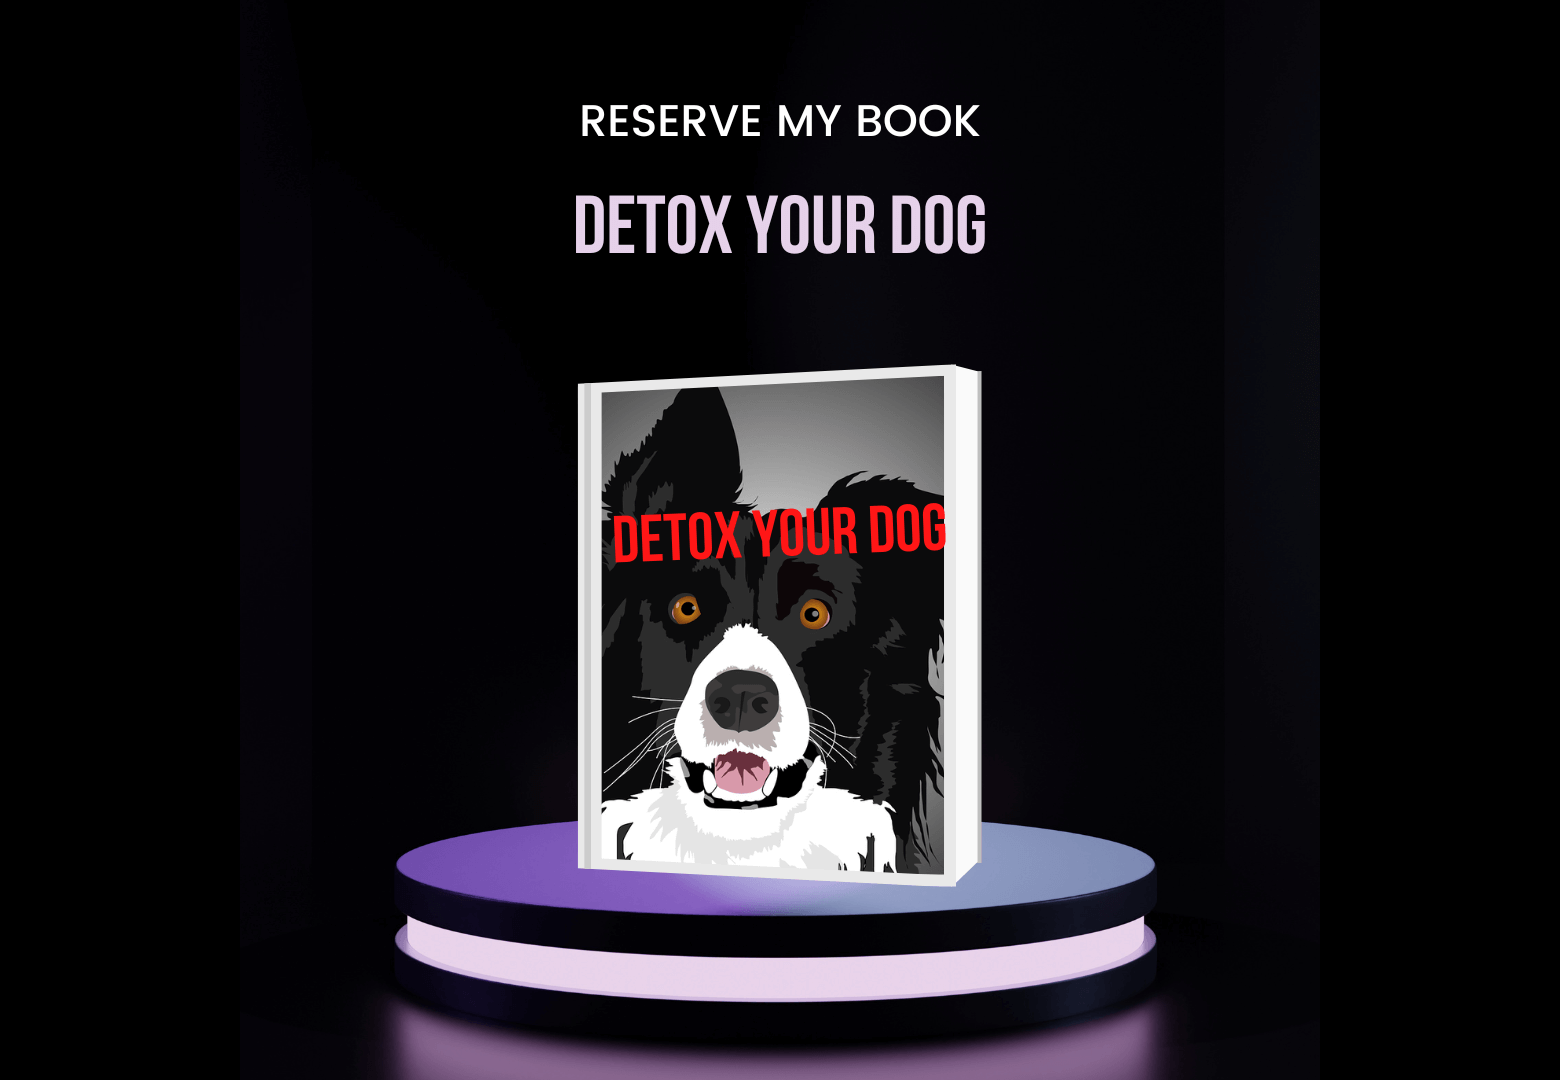 Pre-order the book detox your dog